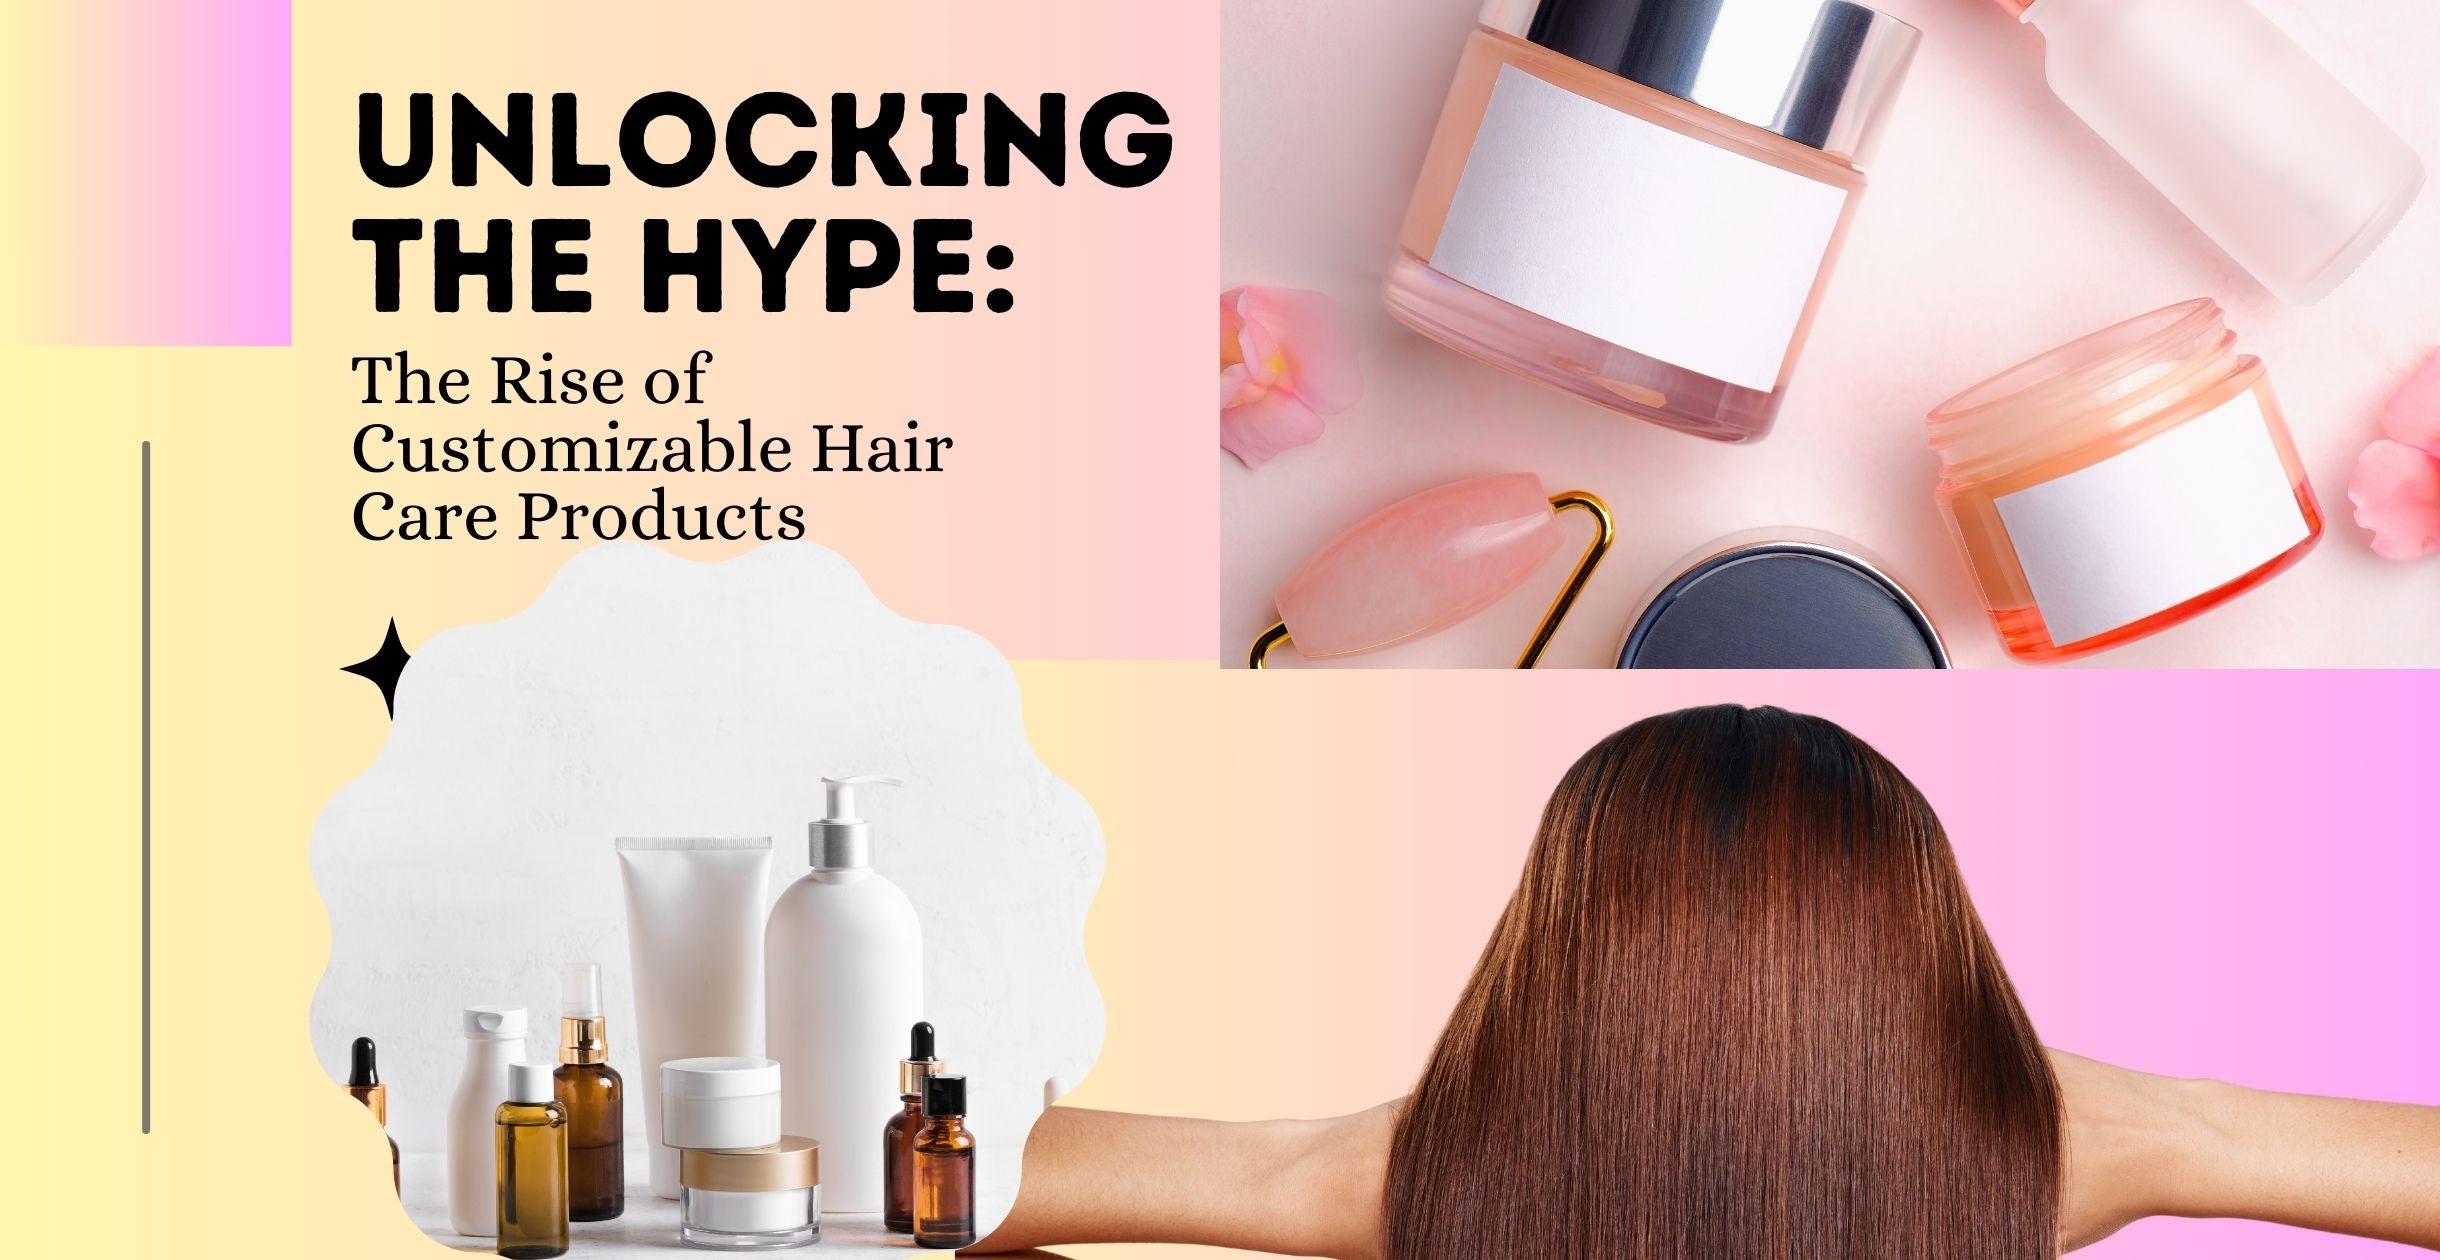 Unlocking the Hype: The Rise of Customizable Hair Care Products